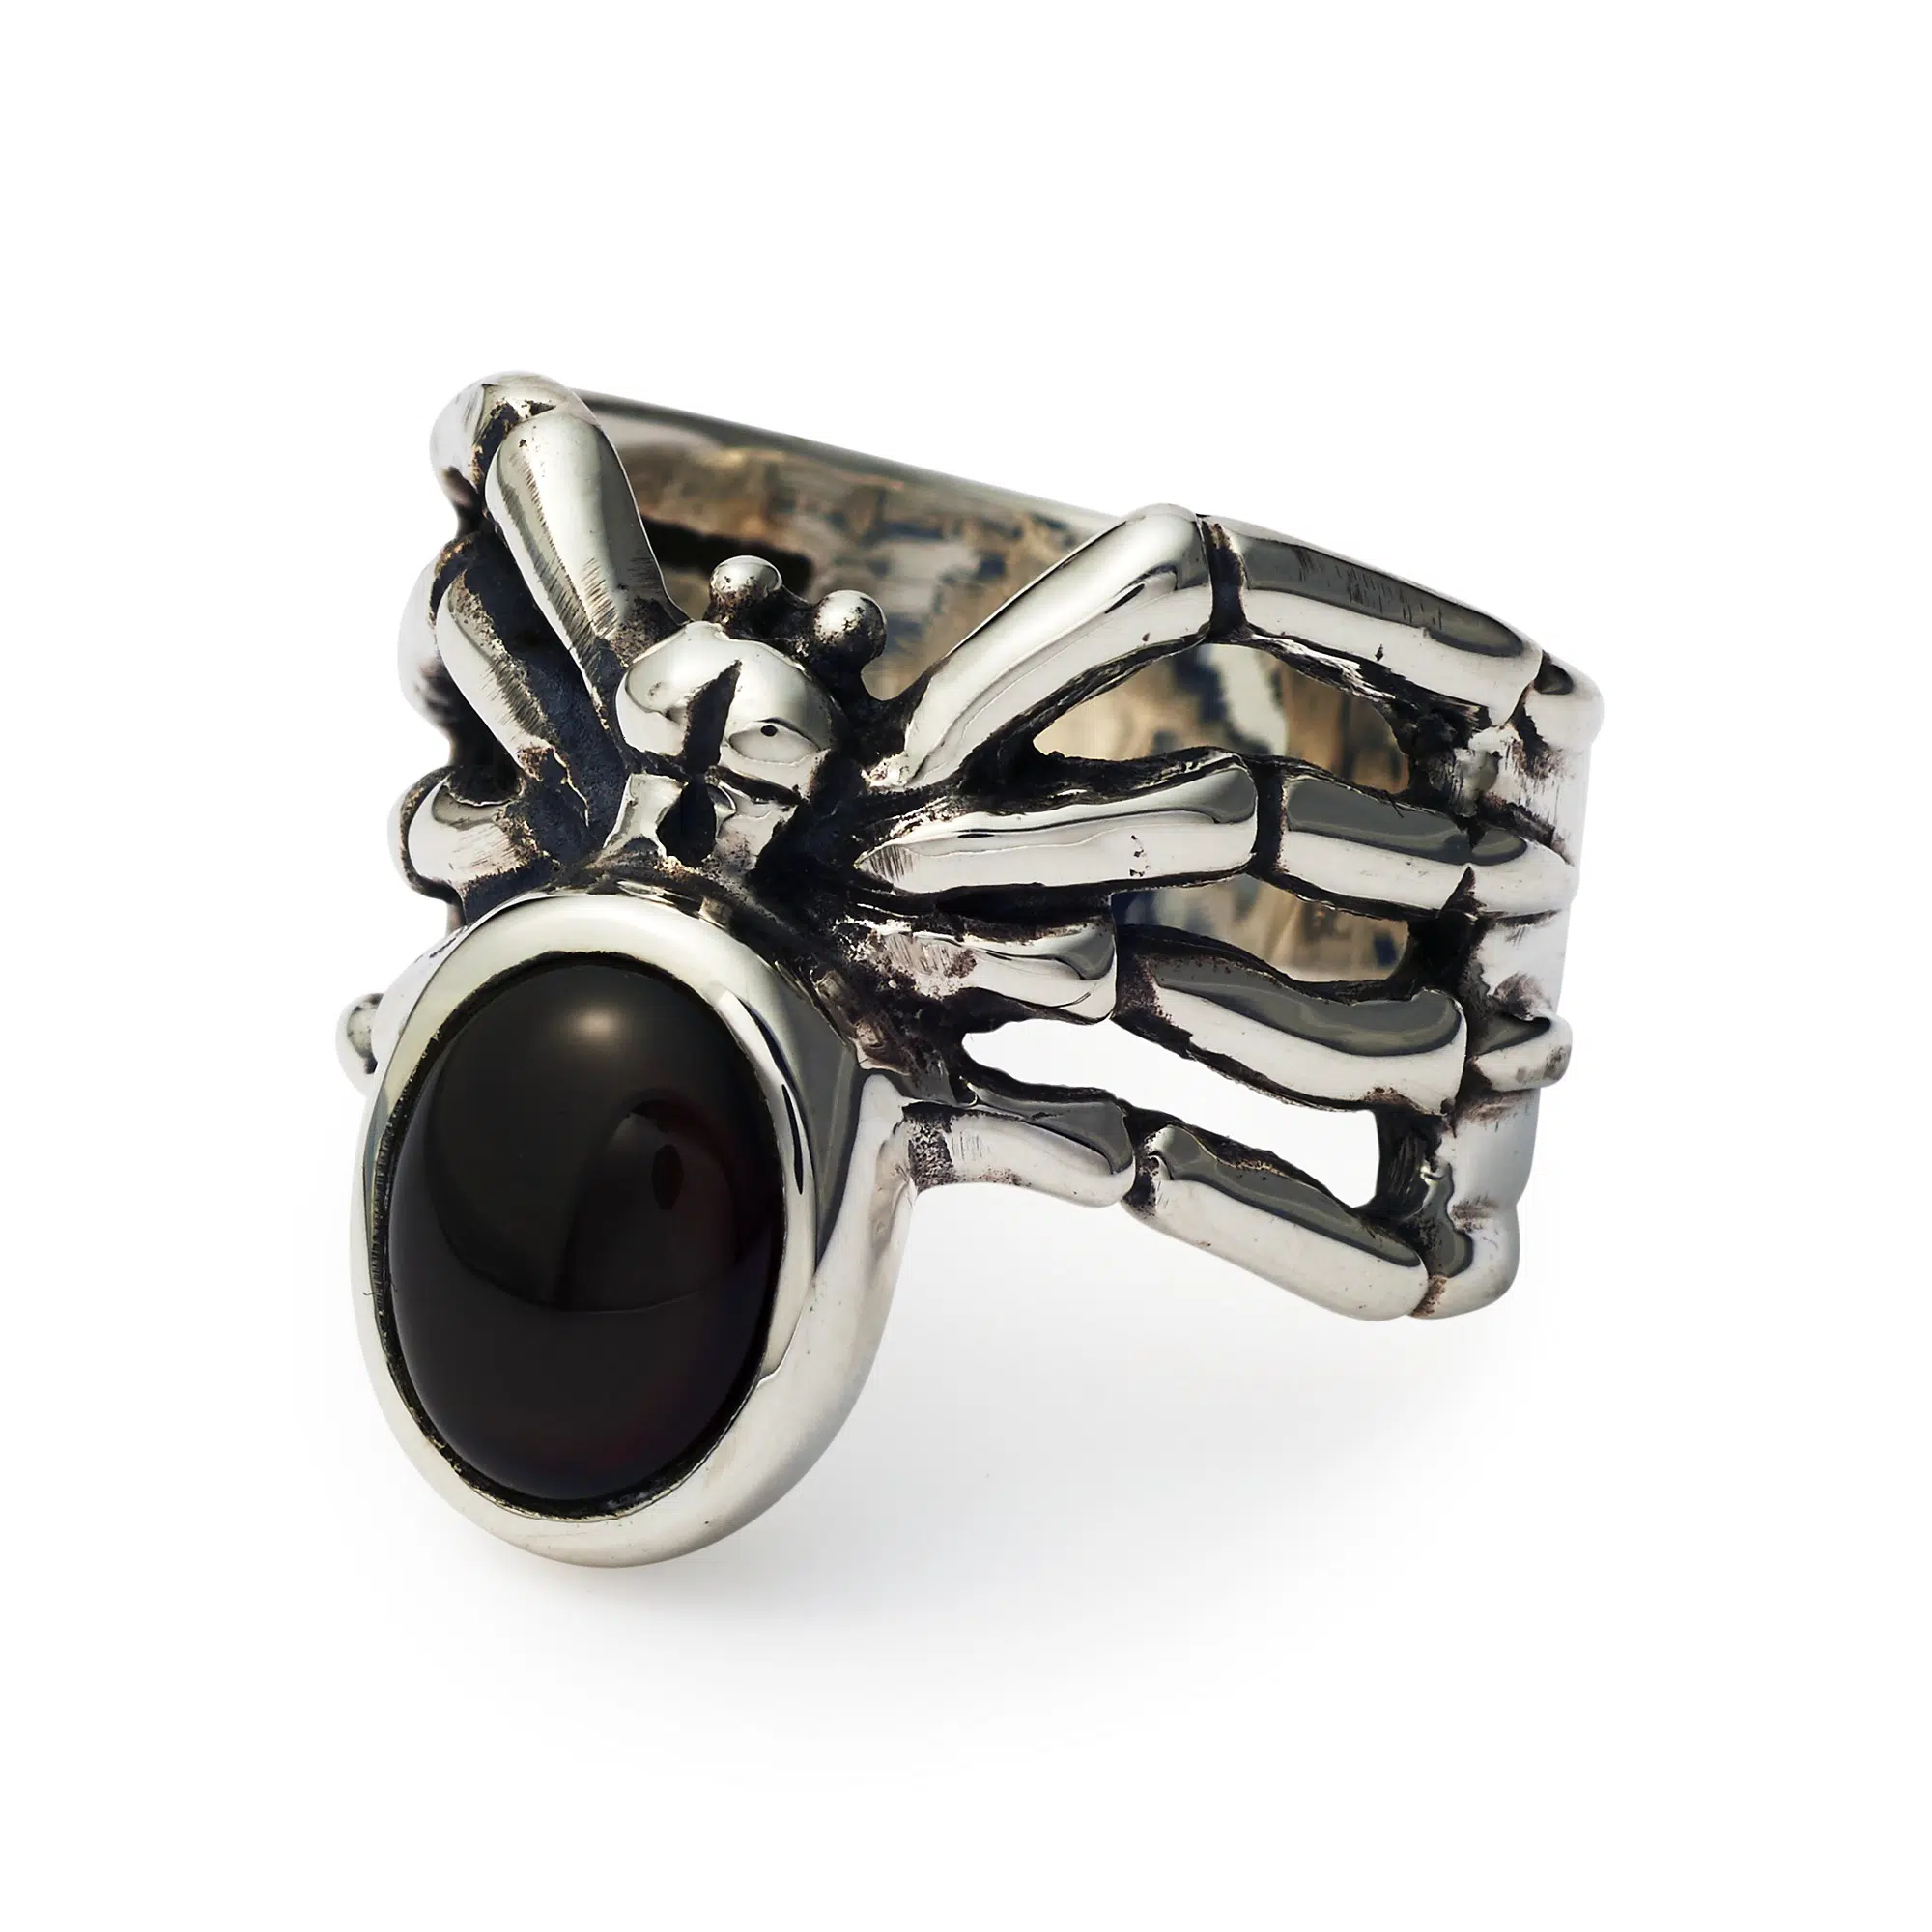 Buy Spider Ring / Recycled Sterling Silver / Statement Ring / Oxidised  Black or Polished / Handmade Ring / Rockcakes Online in India - Etsy